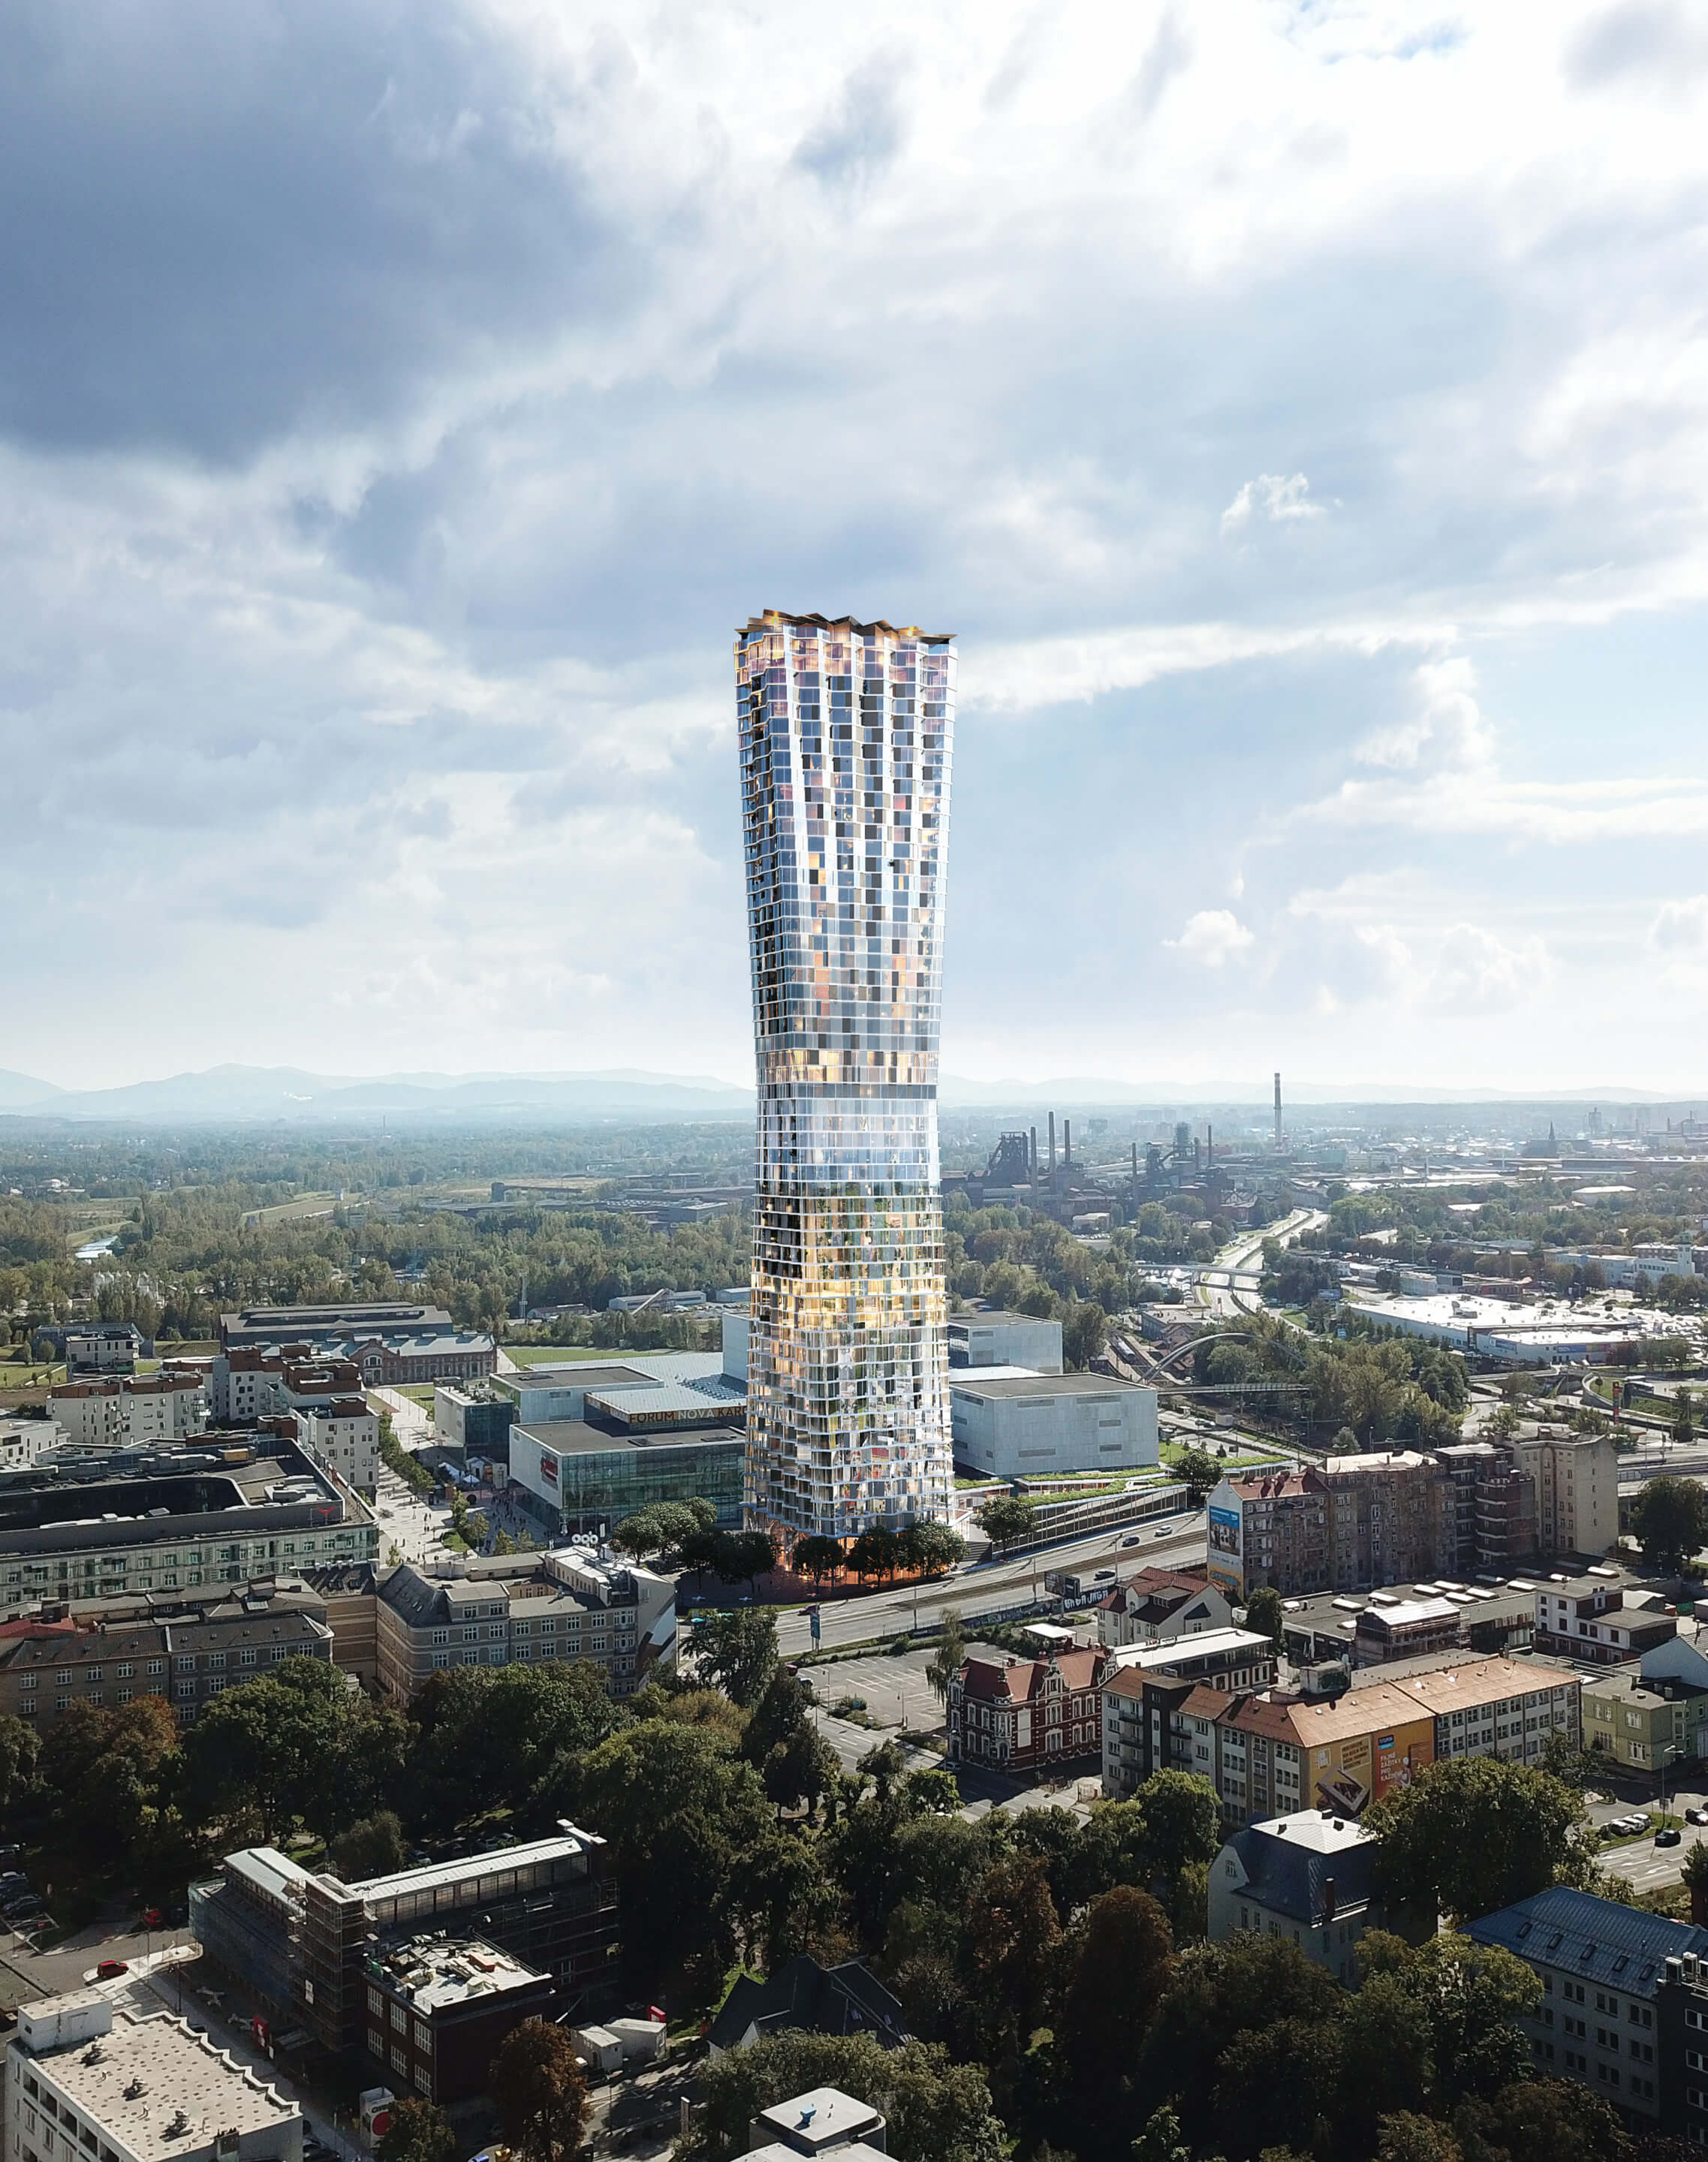 ostrava tower, a tall building cinched at the waste